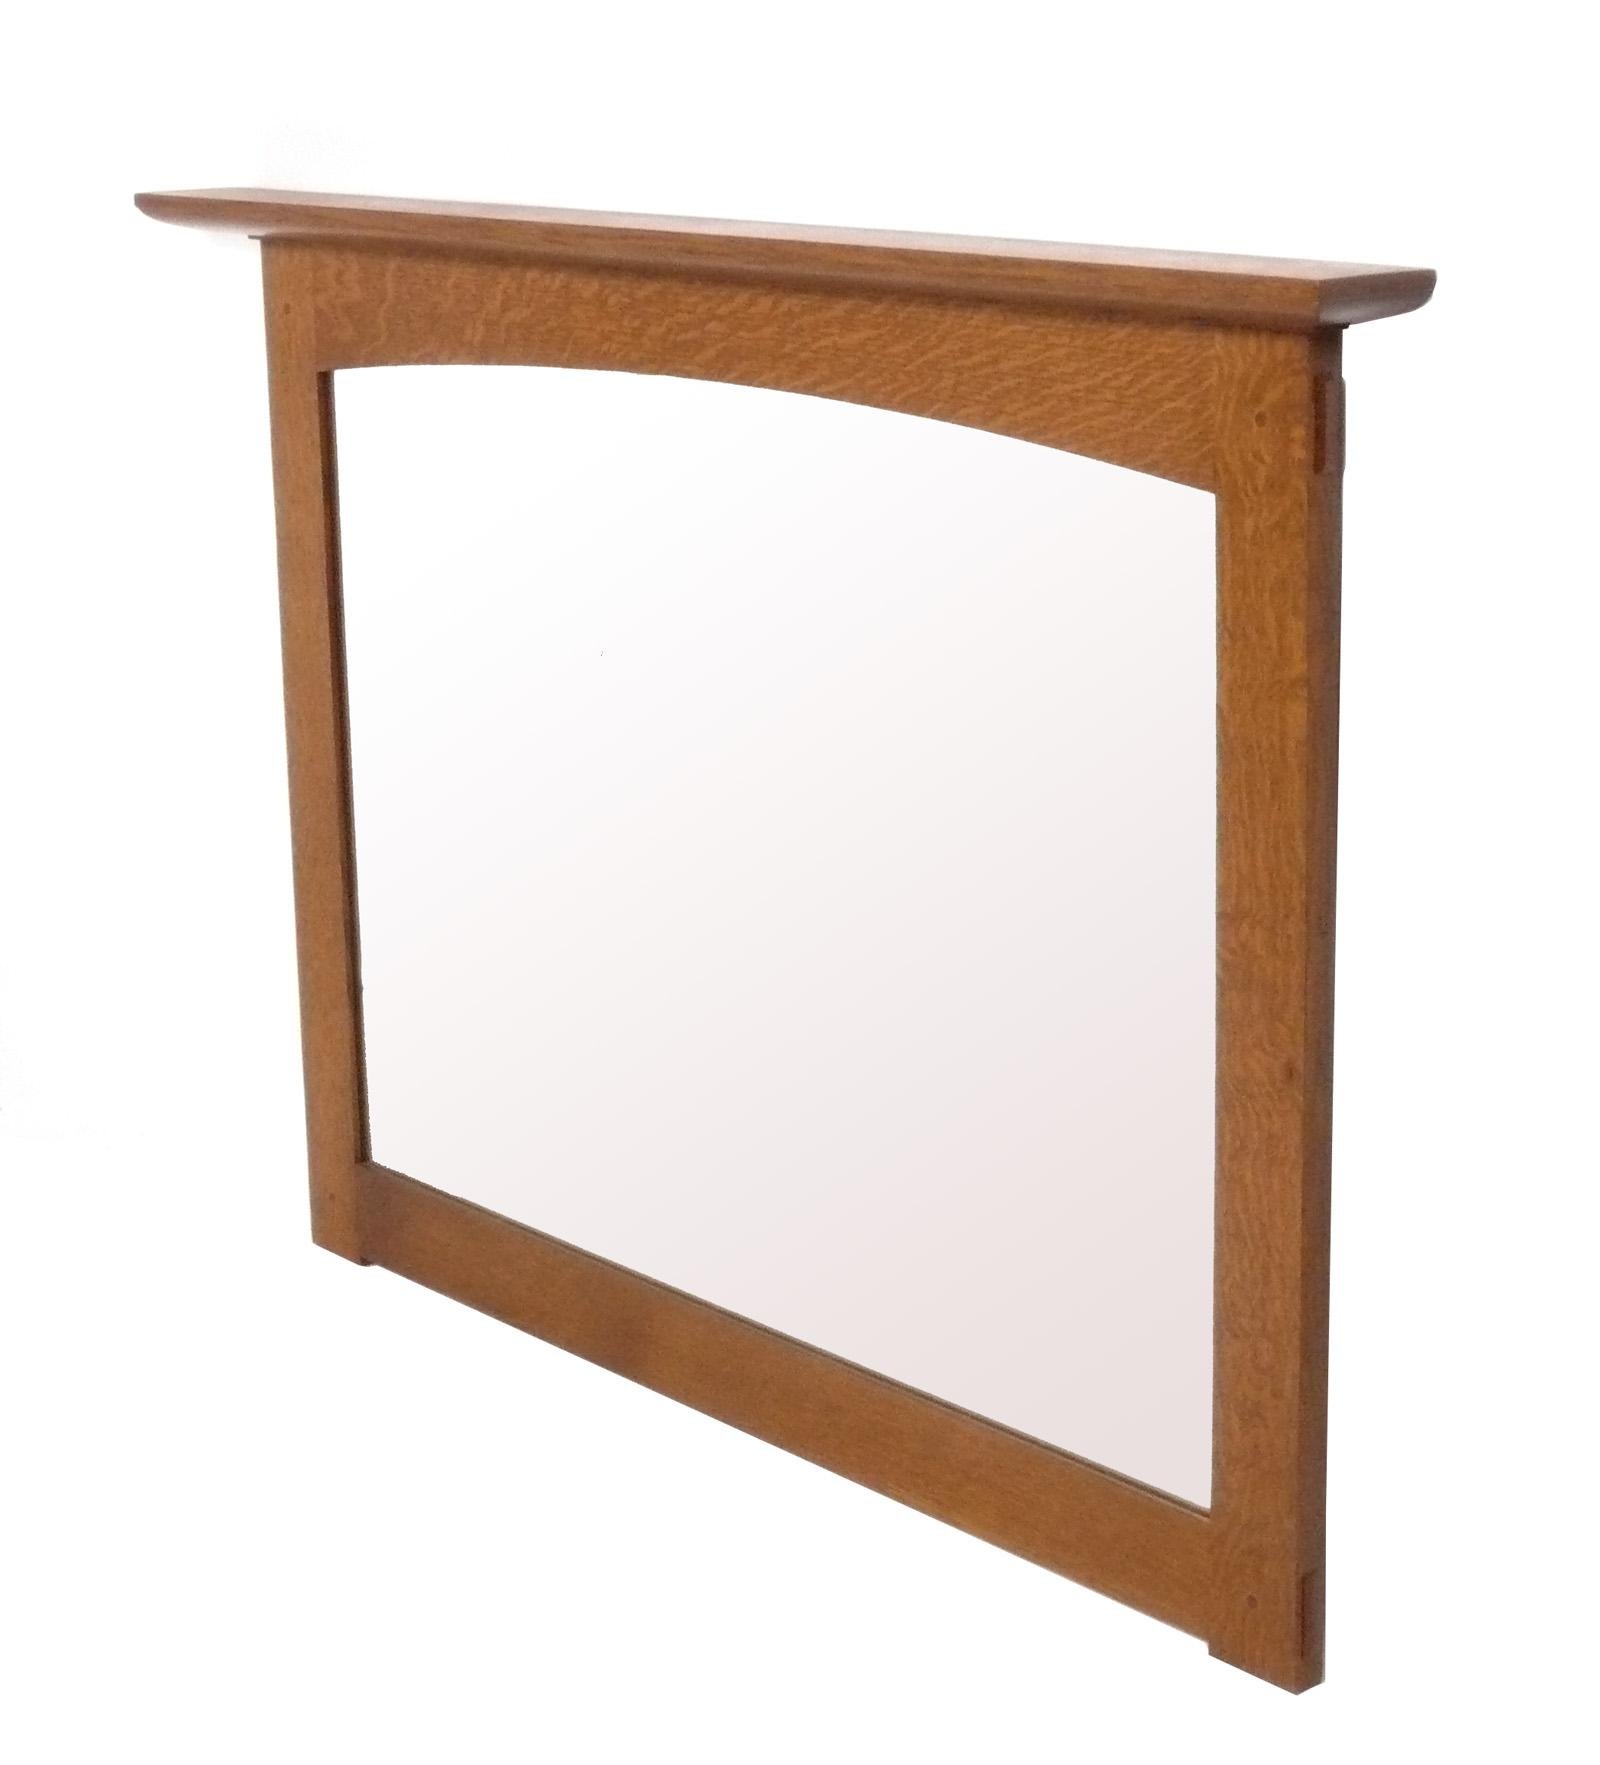 Clean Lined Stickley Mirror, originally designed in the 1910s by Gustav Stickley, this example is part of the authorized line produced by Stickley in the 2000s. Like all Stickley furniture, this piece is extremely well made with pegged, mortis and